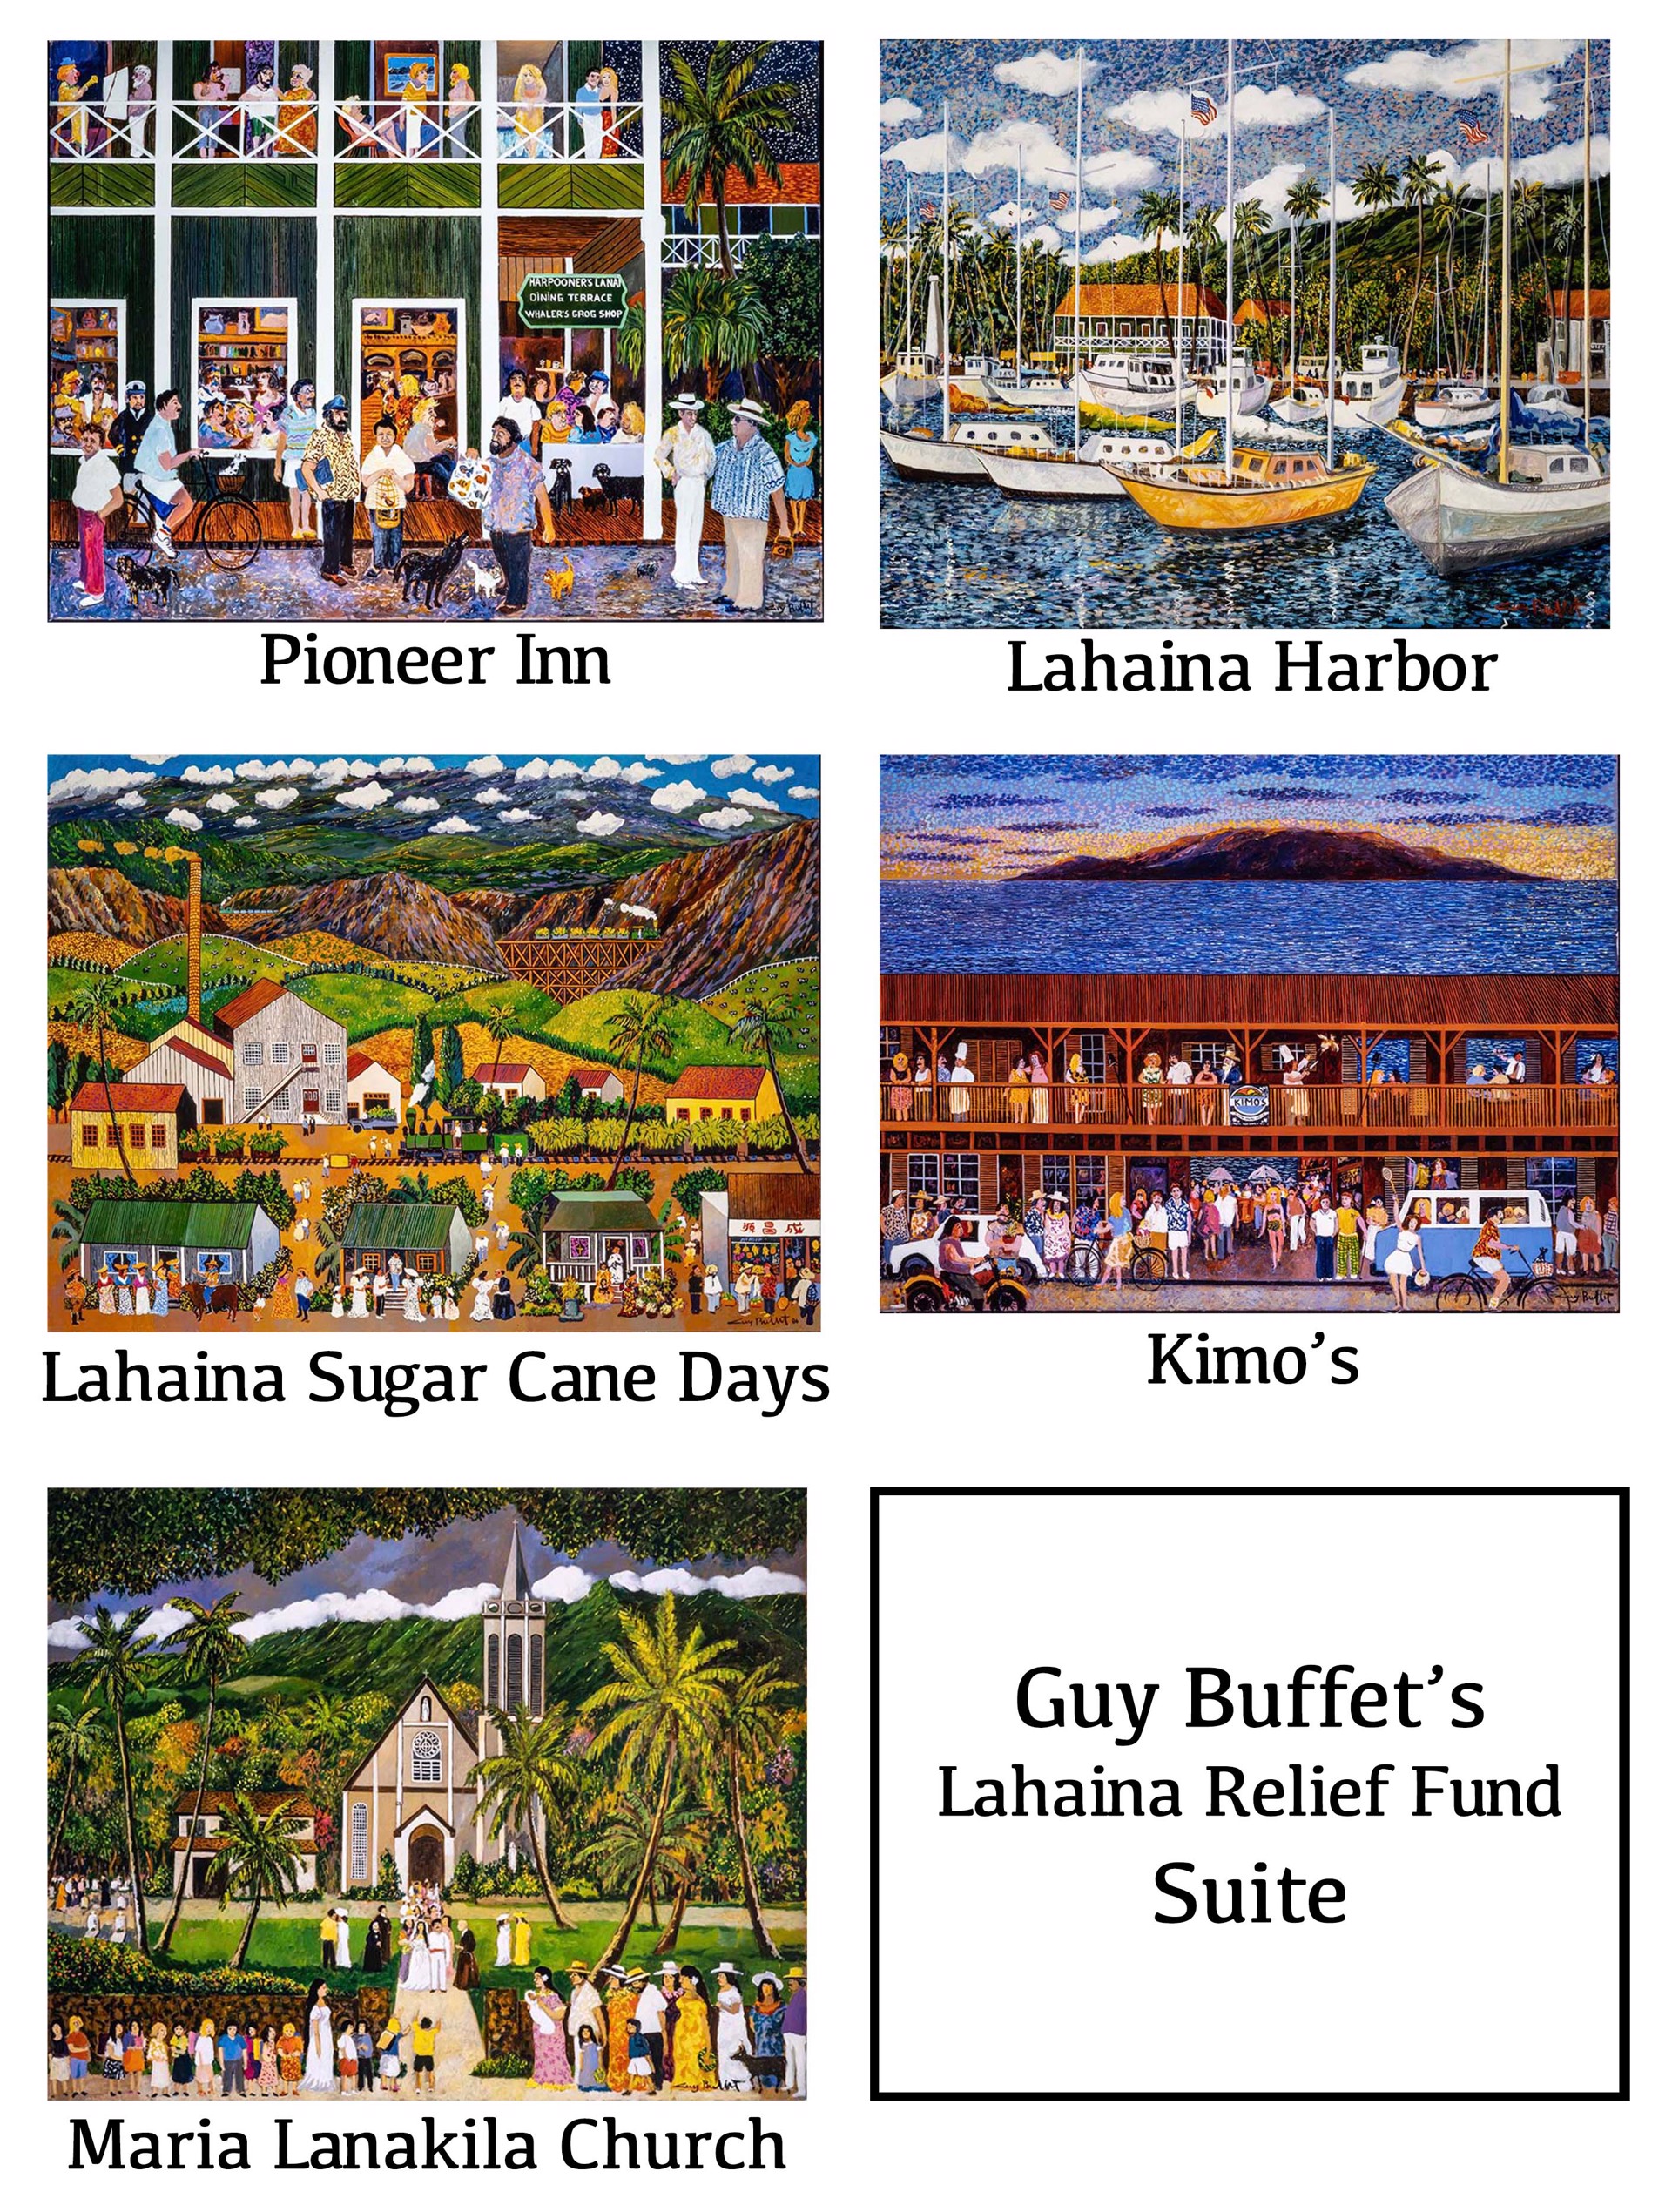 Guy Buffet's Lahaina Relief Fund Suite by Guy Buffet